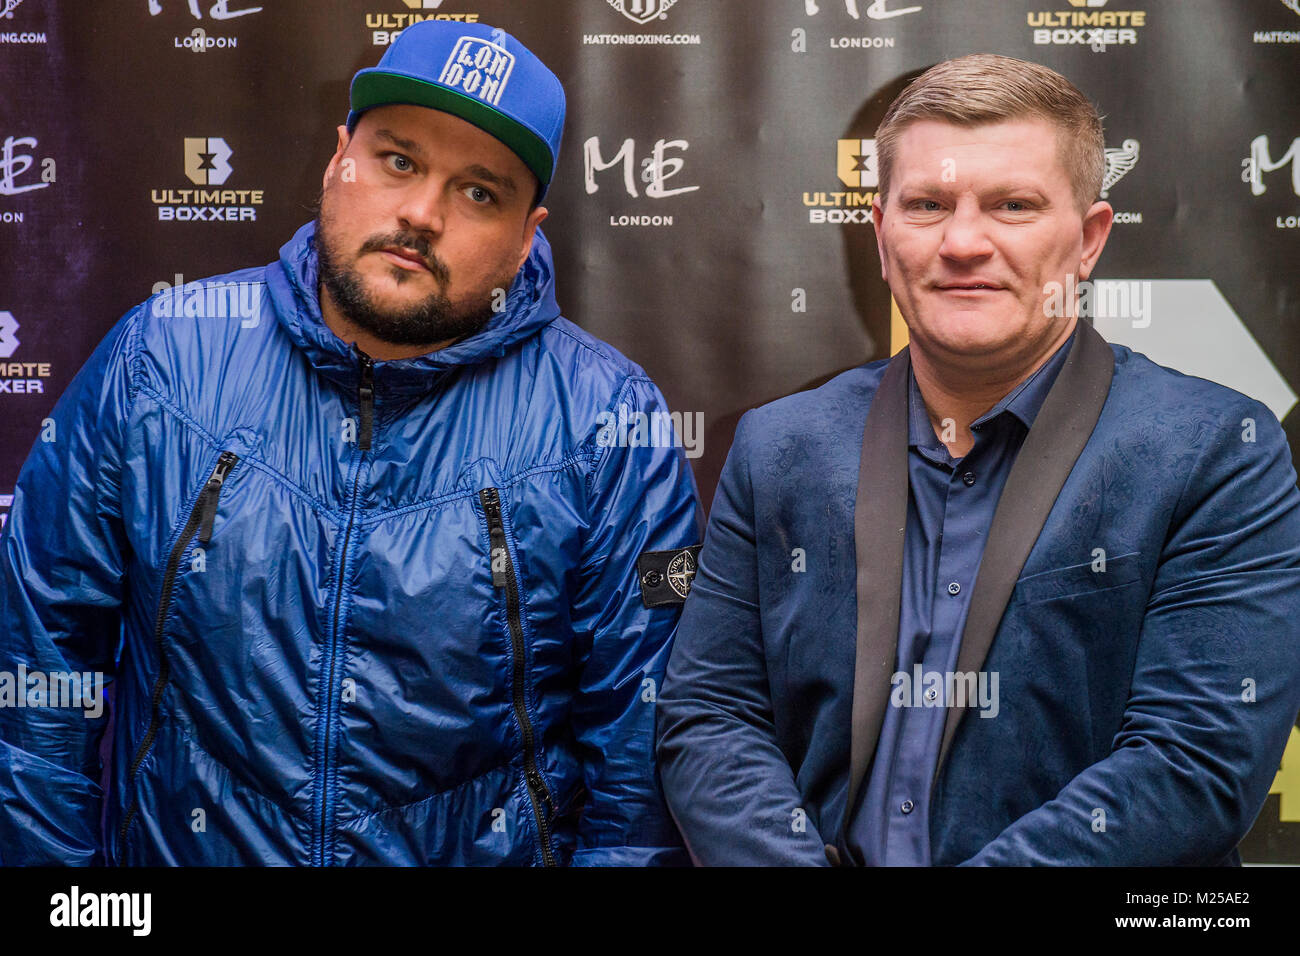 London, UK. 5th February, 2018. DJ Charlie Sloth with Ricky Hatton - The official launch of ULTIMATE BOXER, Britain’s first Boxing Entertainment brand, at ME London Hotel. The single elimination format, approved by the British Boxing Board of Control, will give young untapped talented British professional-boxers life changing career opportunities, with large cash prizes on offer for the tournament champion. Credit: Guy Bell/Alamy Live News Stock Photo